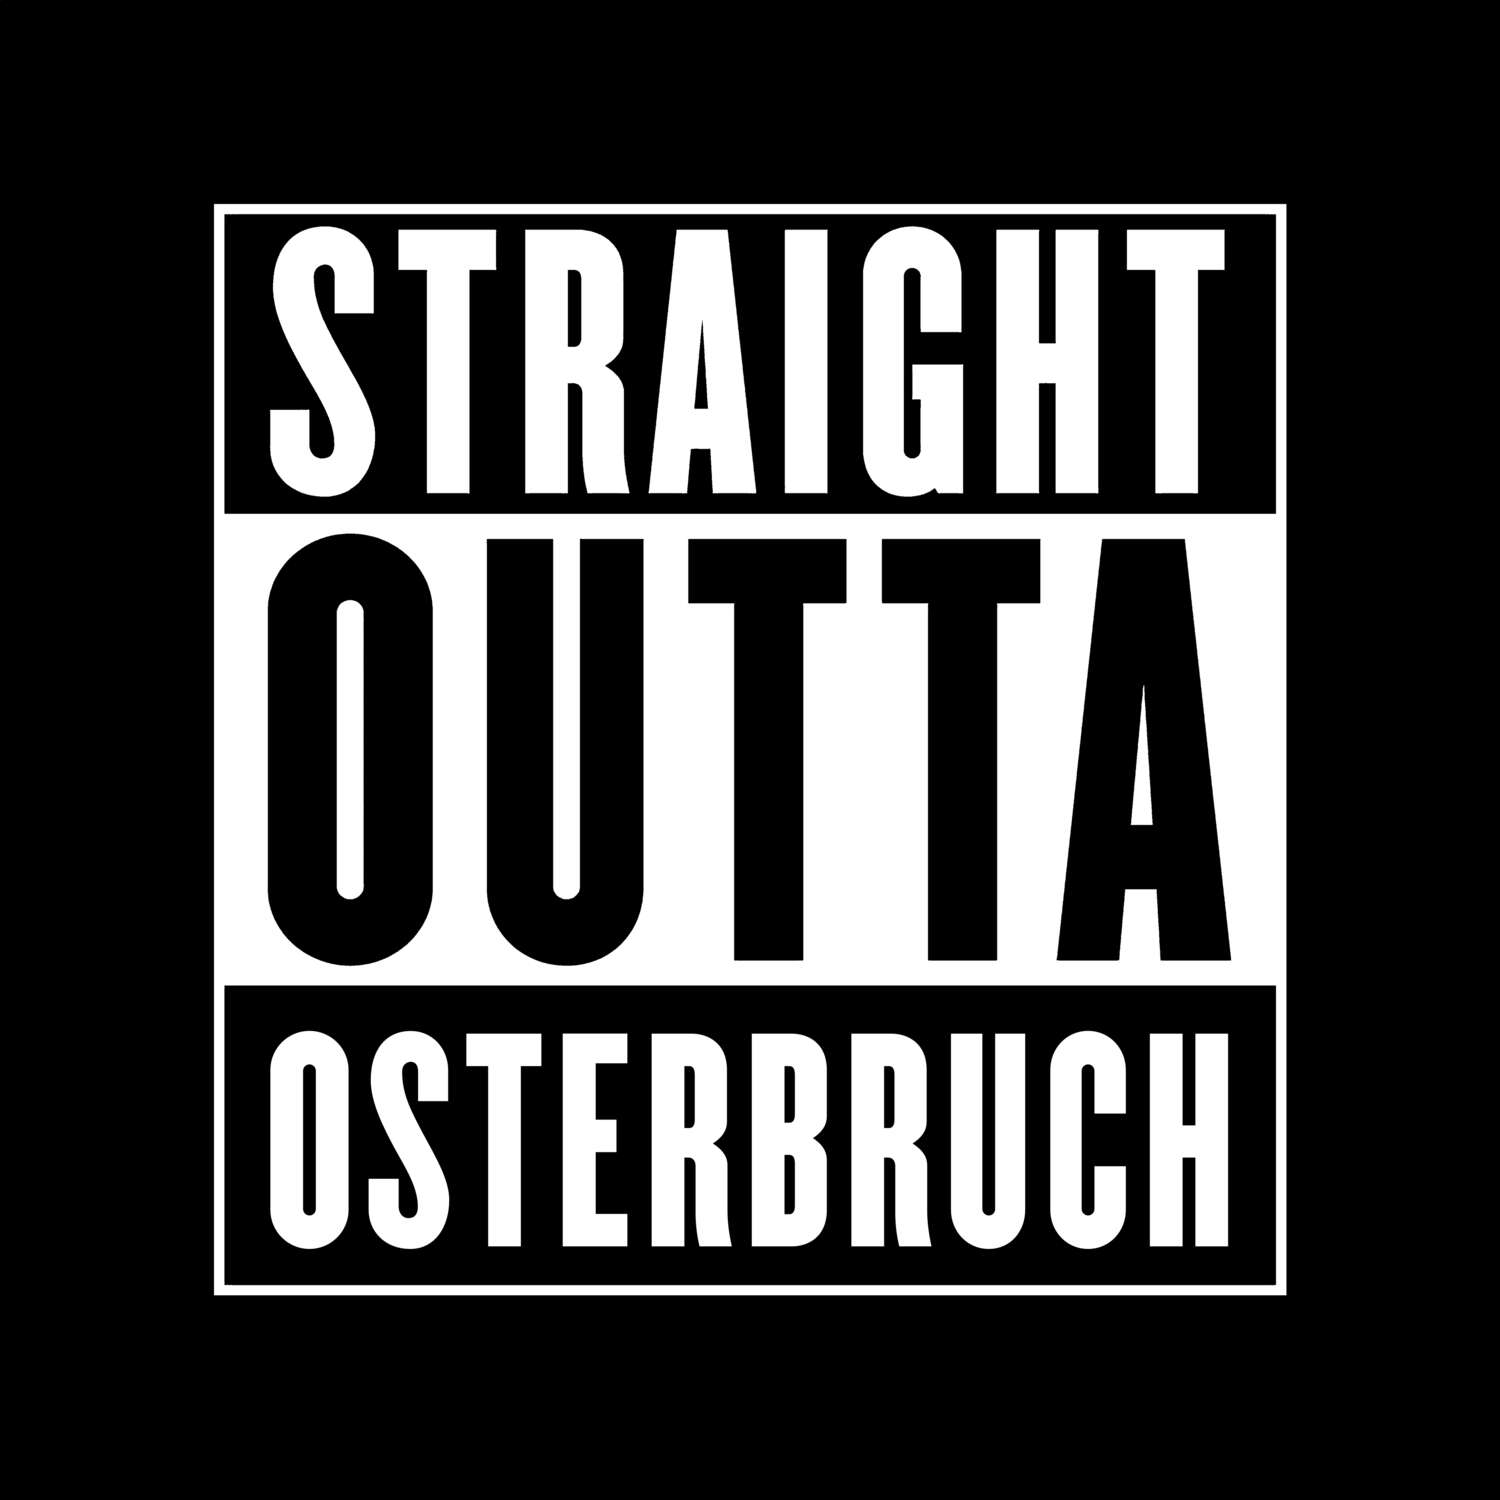 Osterbruch T-Shirt »Straight Outta«